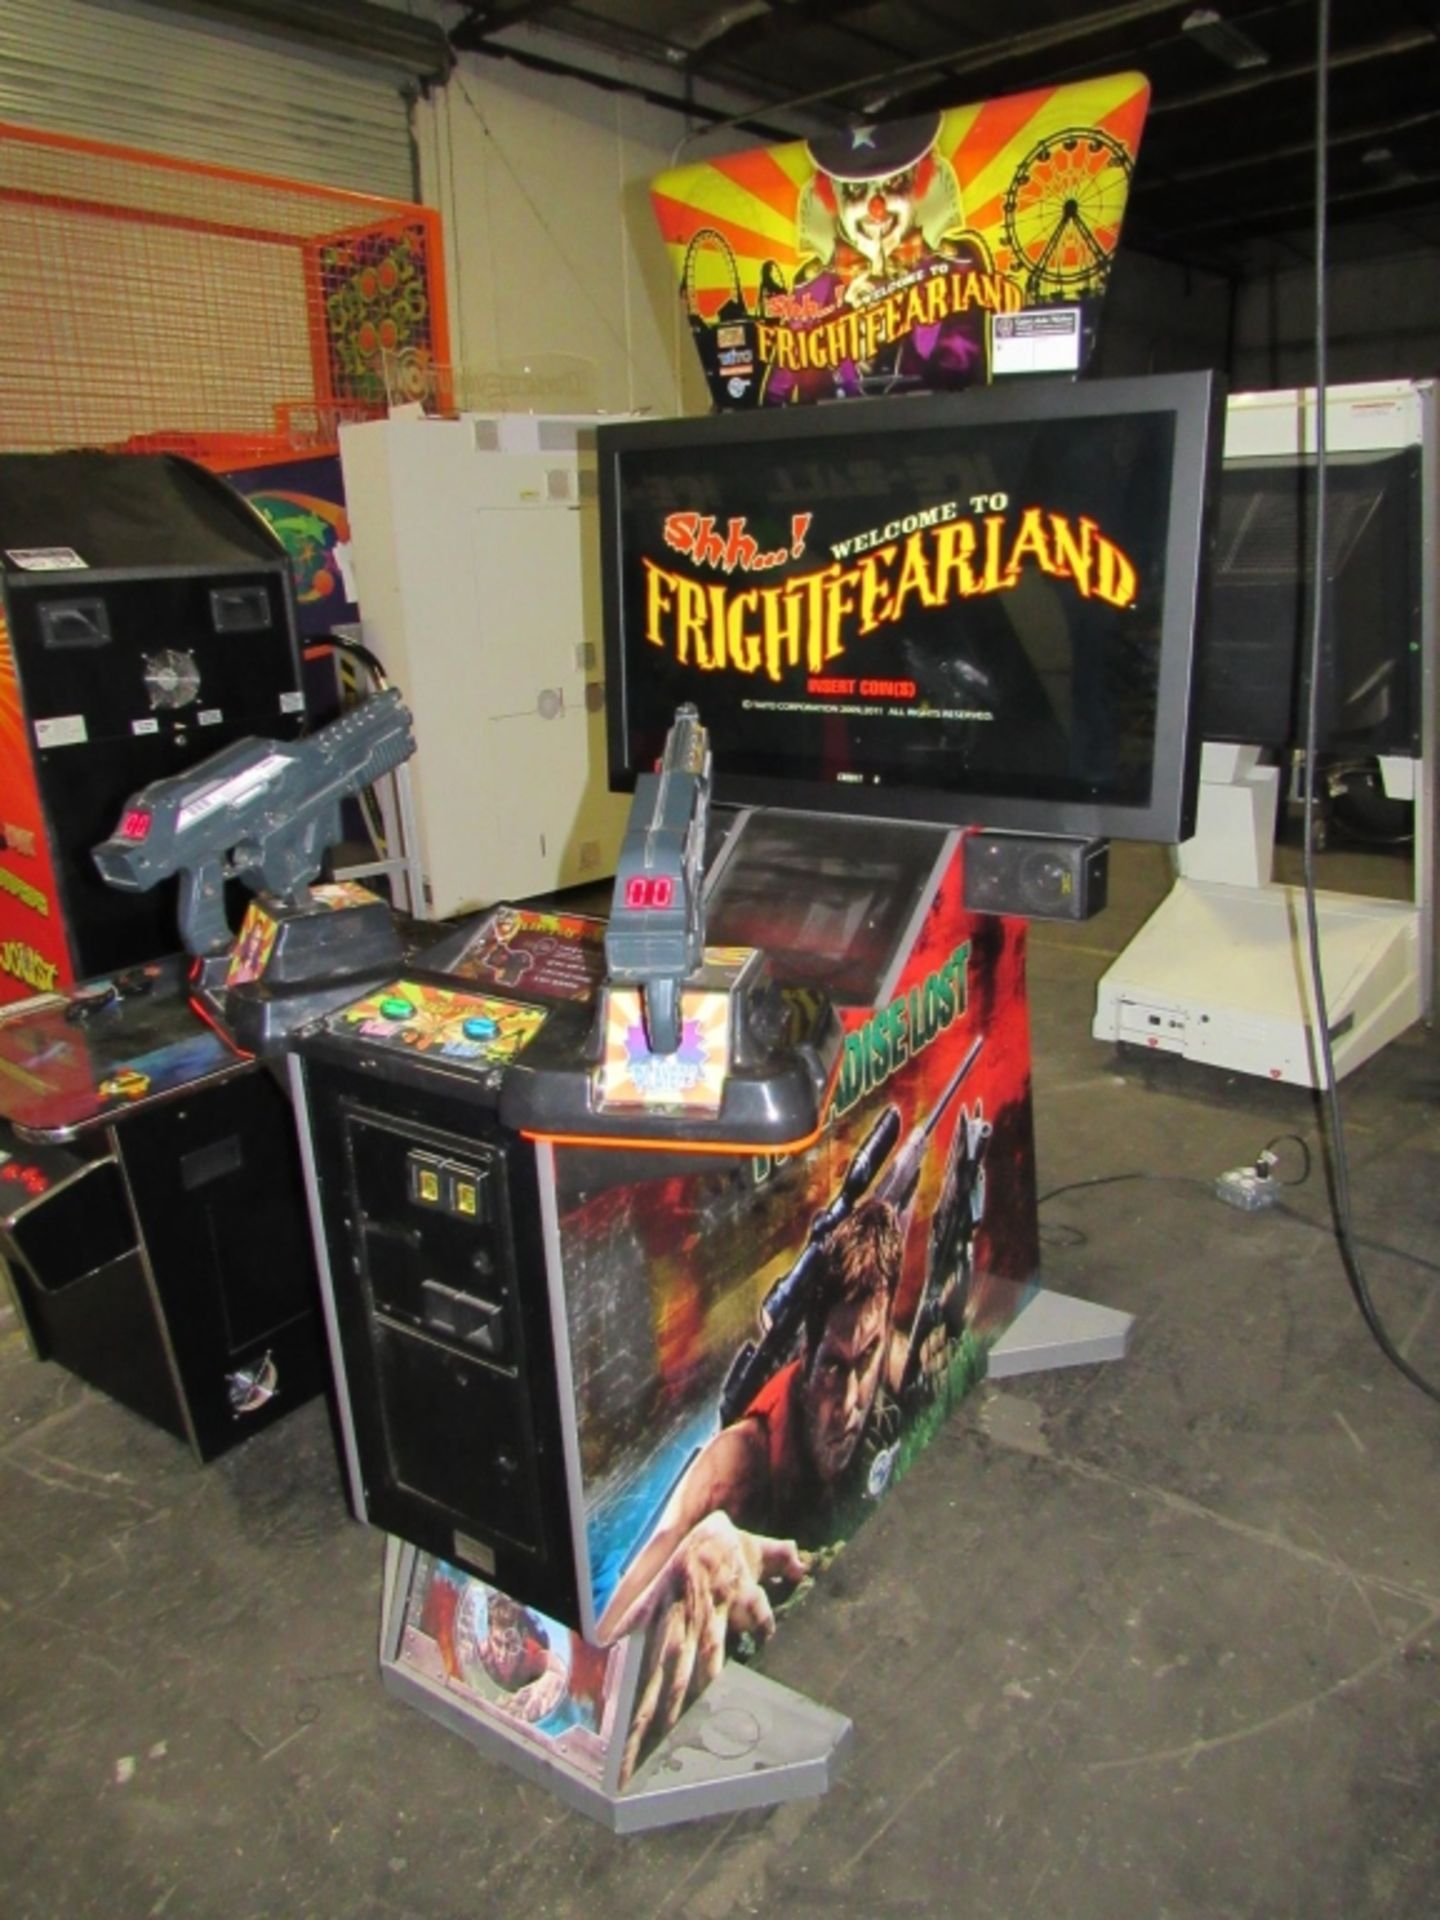 FRIGHT FEARLAND 42" LCD FIXED GUN ARCADE GAME